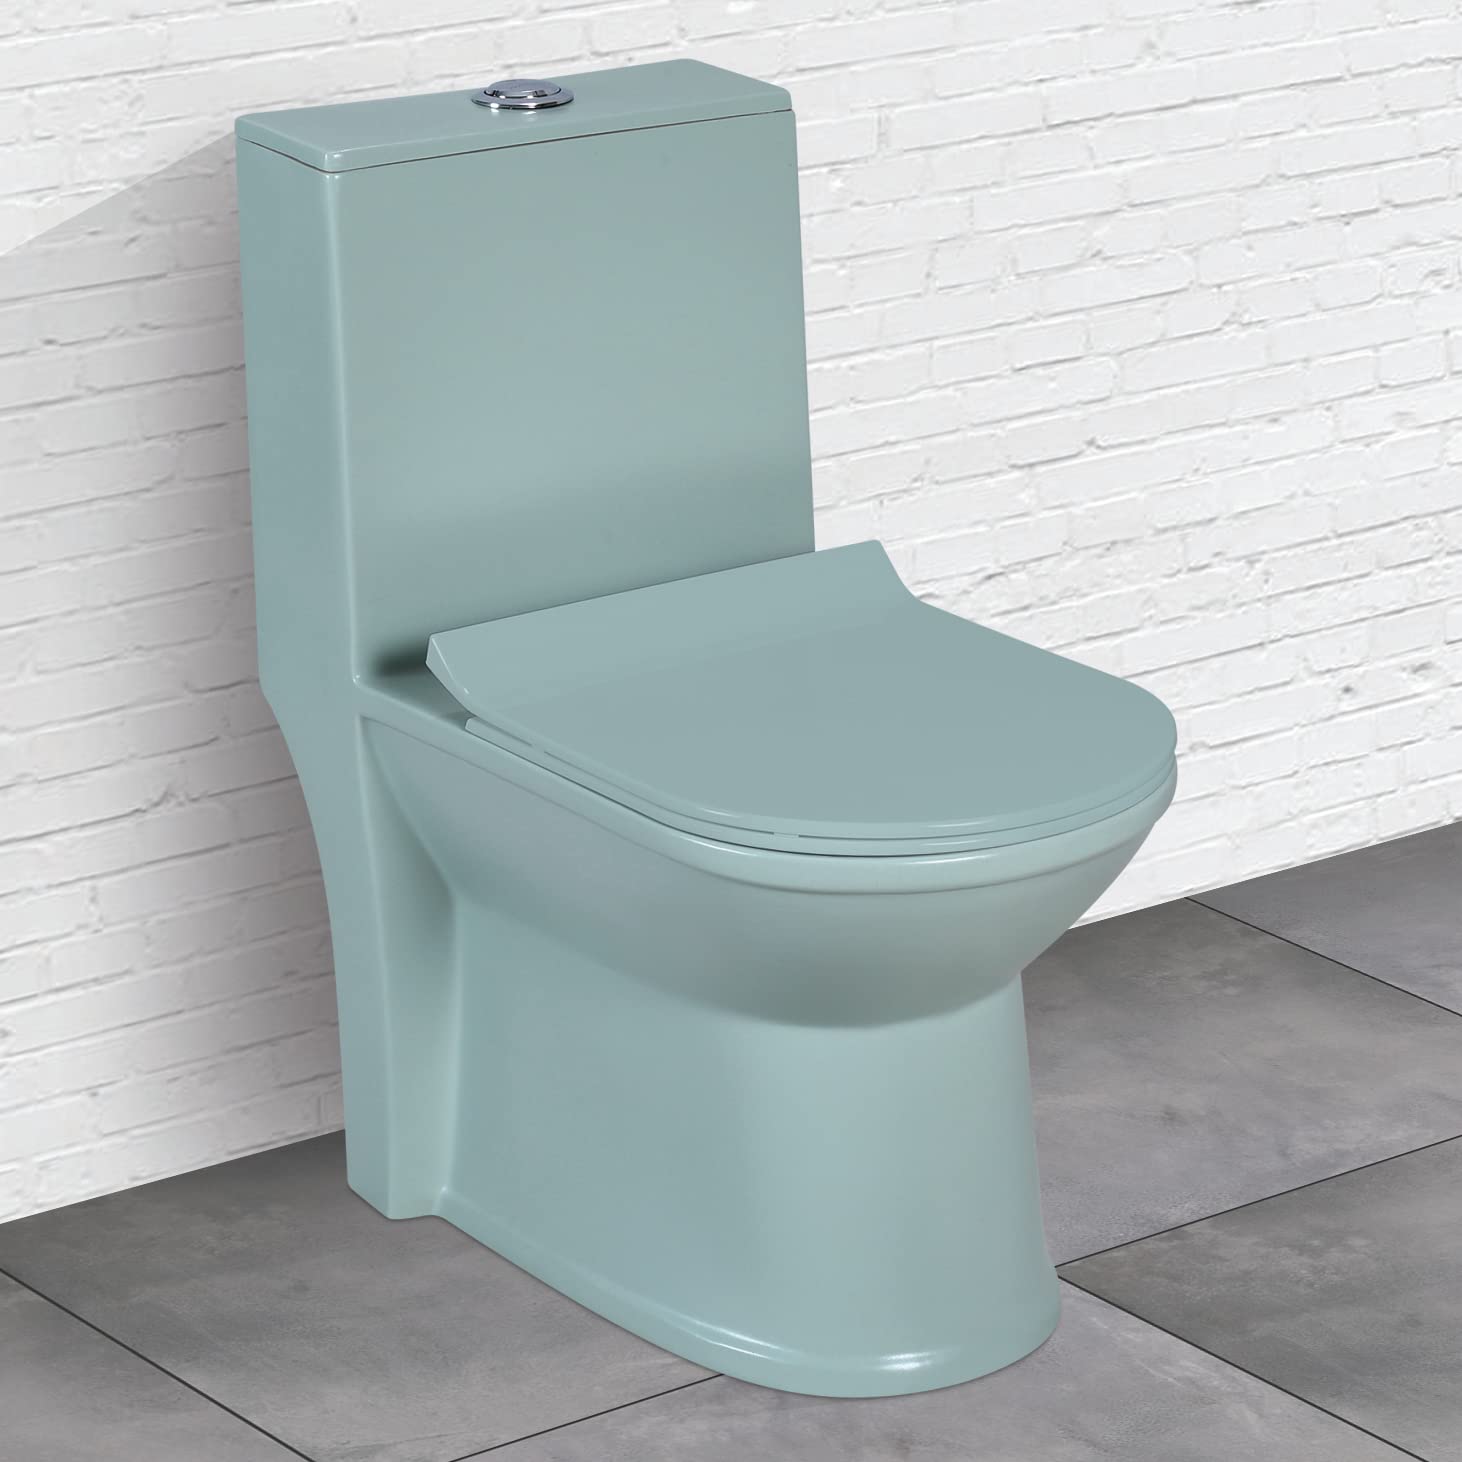 Plantex Platinium Ceramic Rimless One Piece Western Toilet/Water Closet/Commode With Soft Close Toilet Seat - S Trap Outlet (APS-745, Olive)